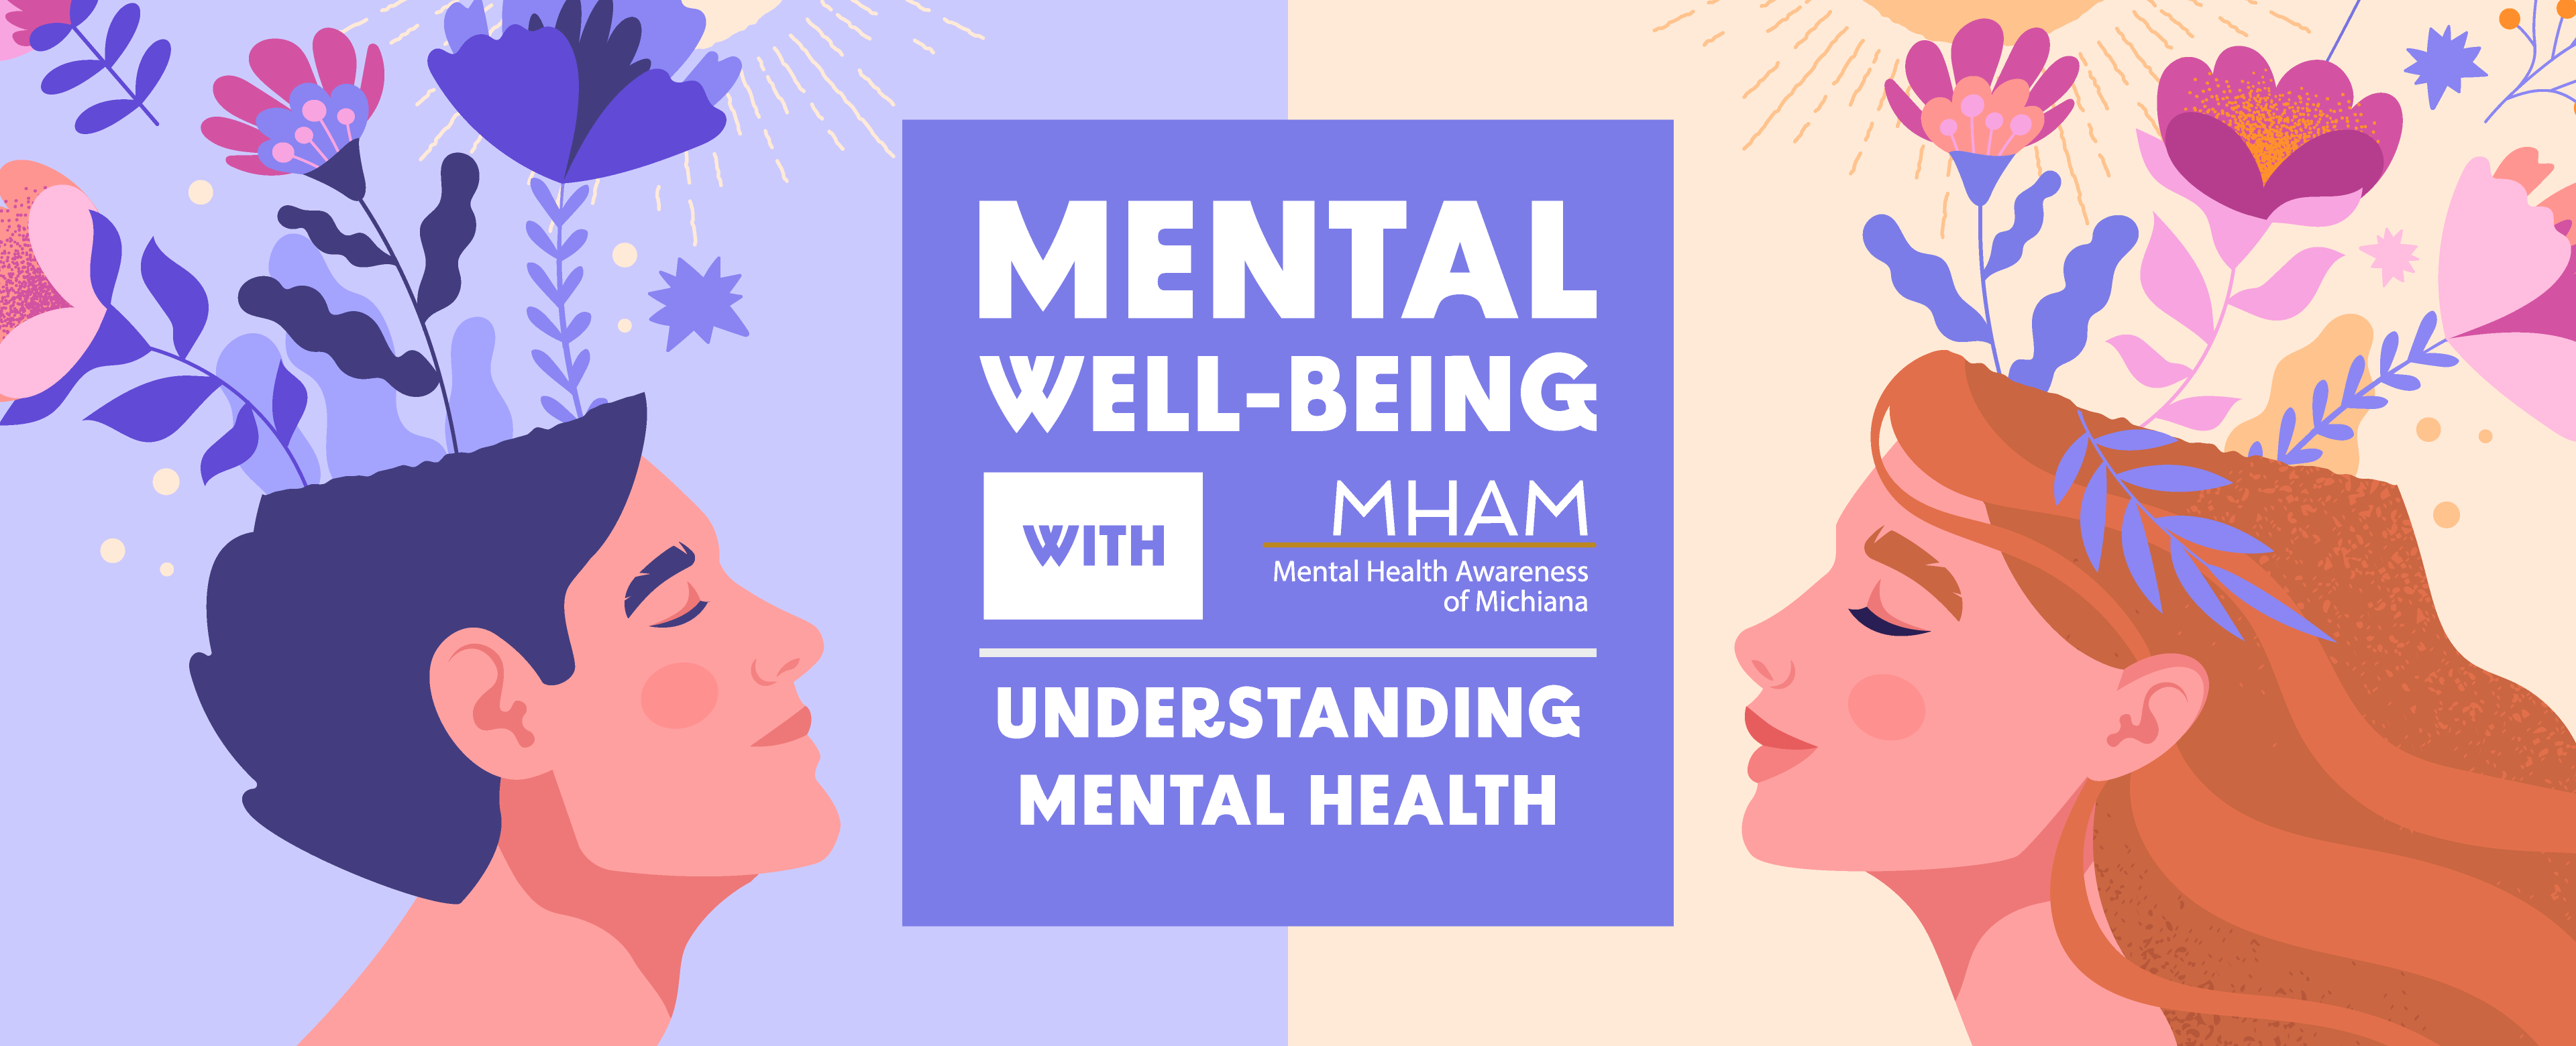 Mental Well-Being with Mental Health Awareness of Michiana: Understanding Mental Health